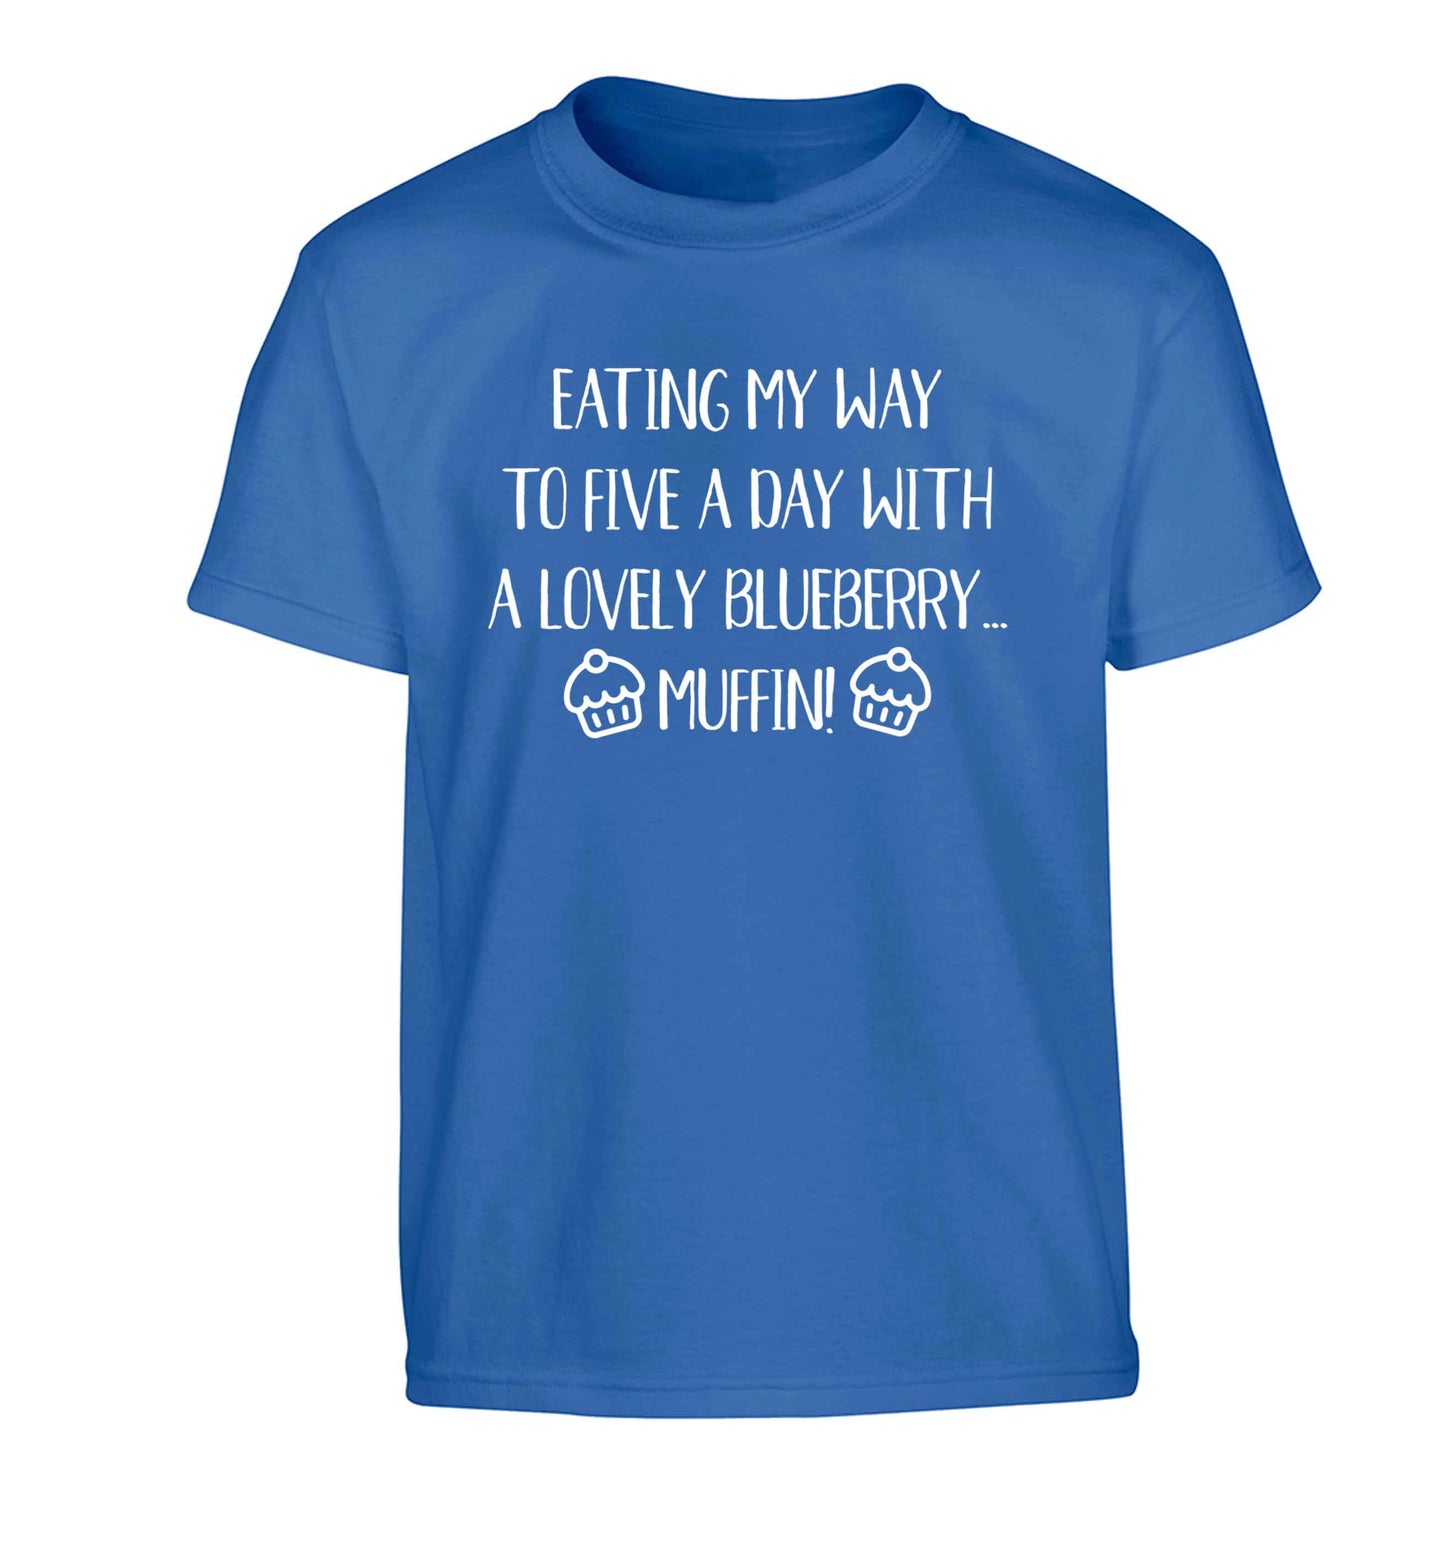 Eating my way to five a day with a lovely blueberry muffin Children's blue Tshirt 12-13 Years